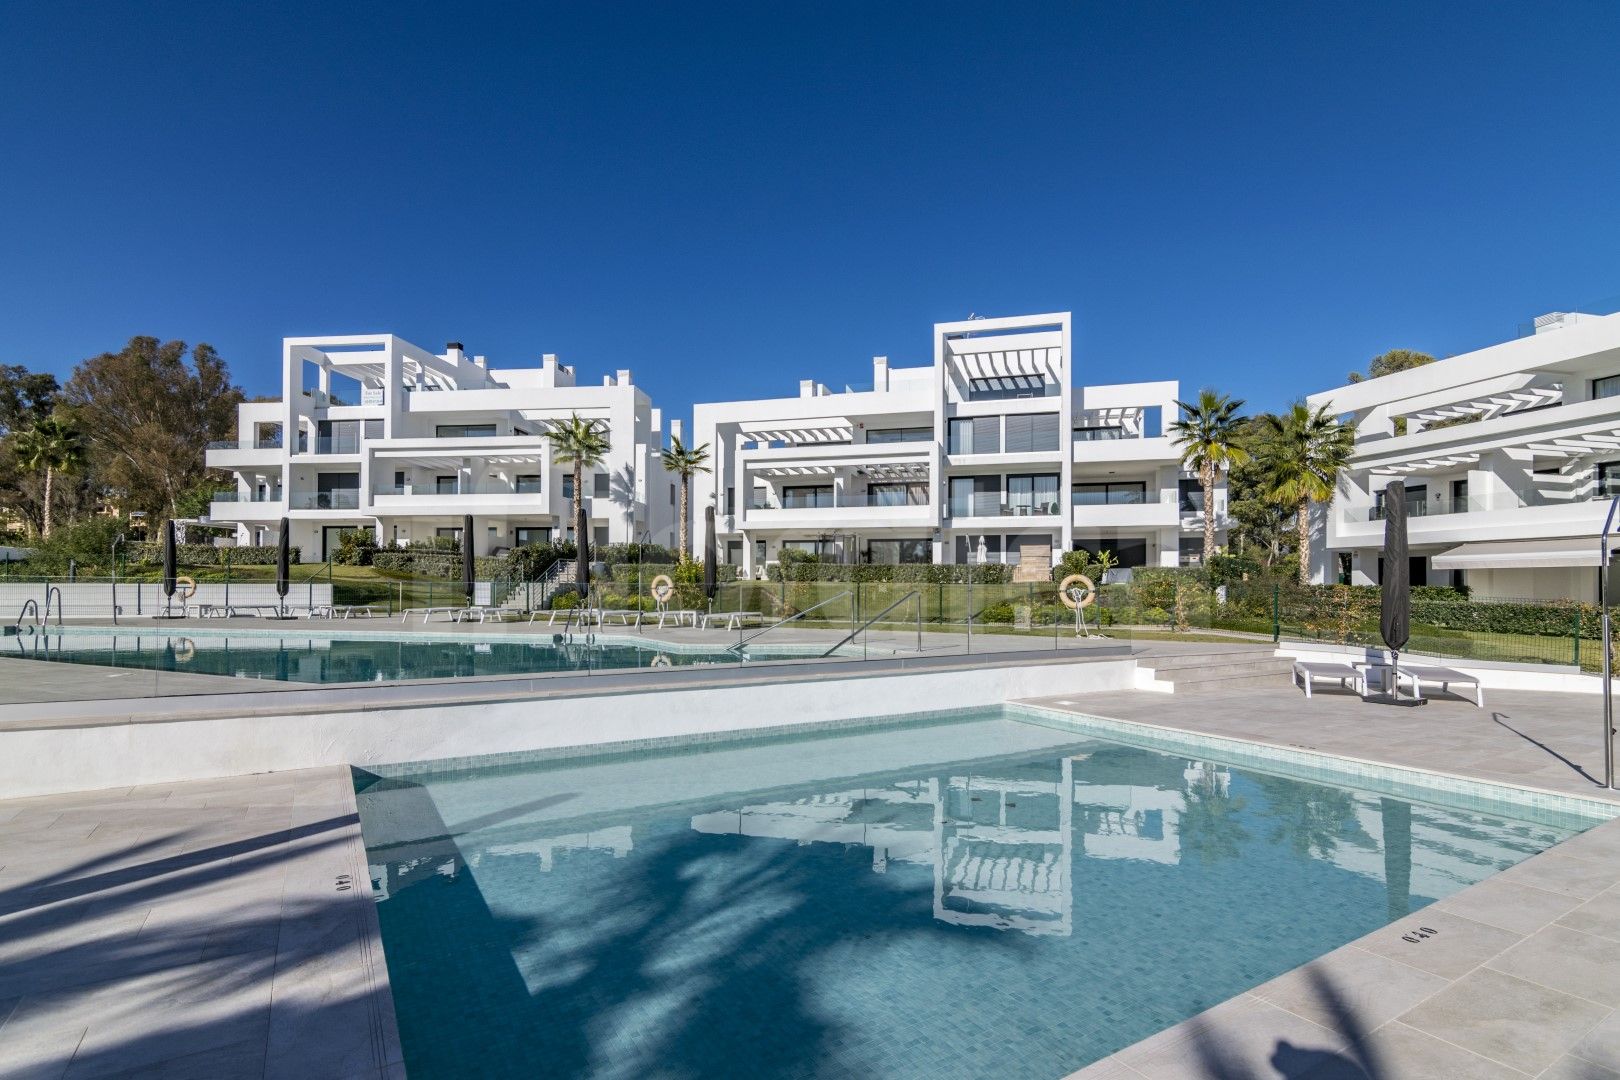 Qlistings - 2 Bedroom Penthouse For Sale In Estepona Property Image